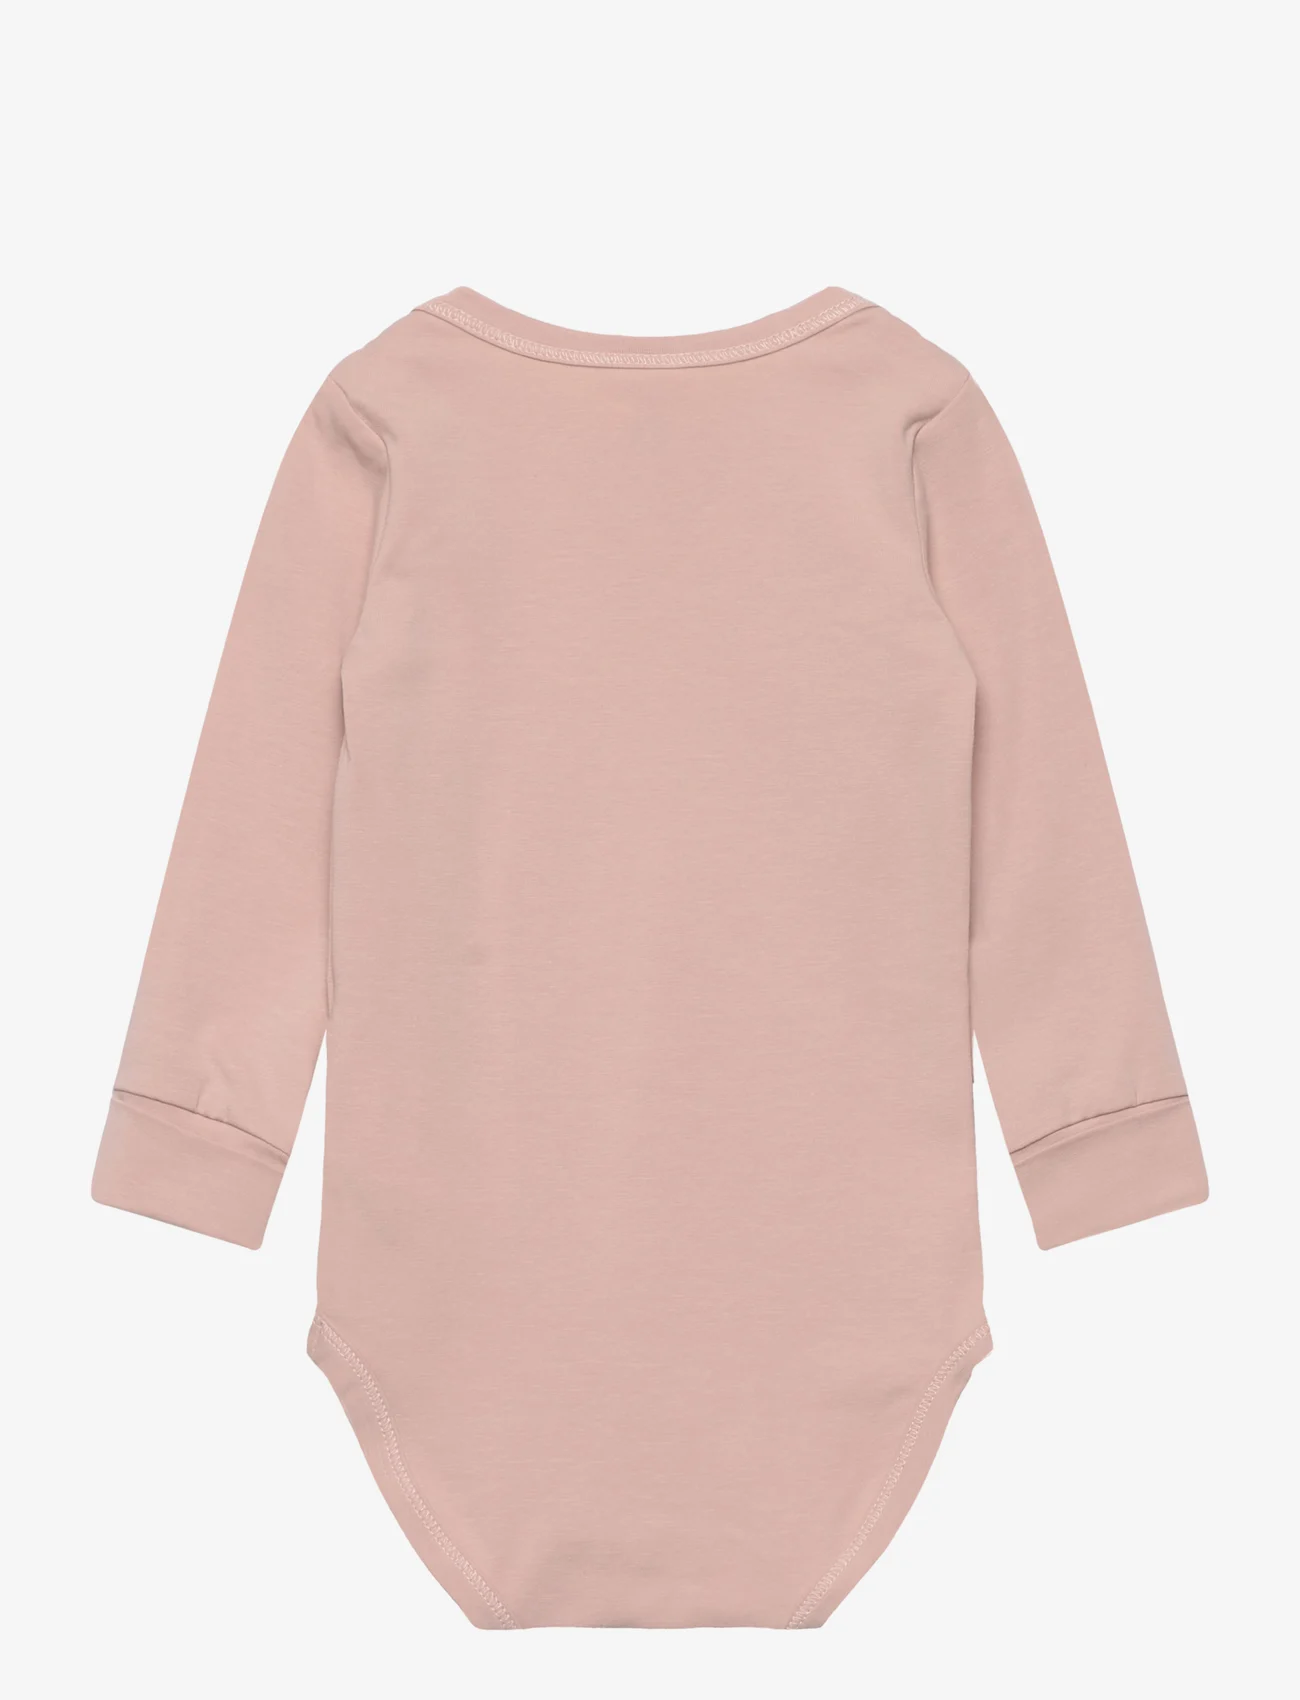 Müsli by Green Cotton - Cozy me l/s body - long-sleeved - spa rose - 1